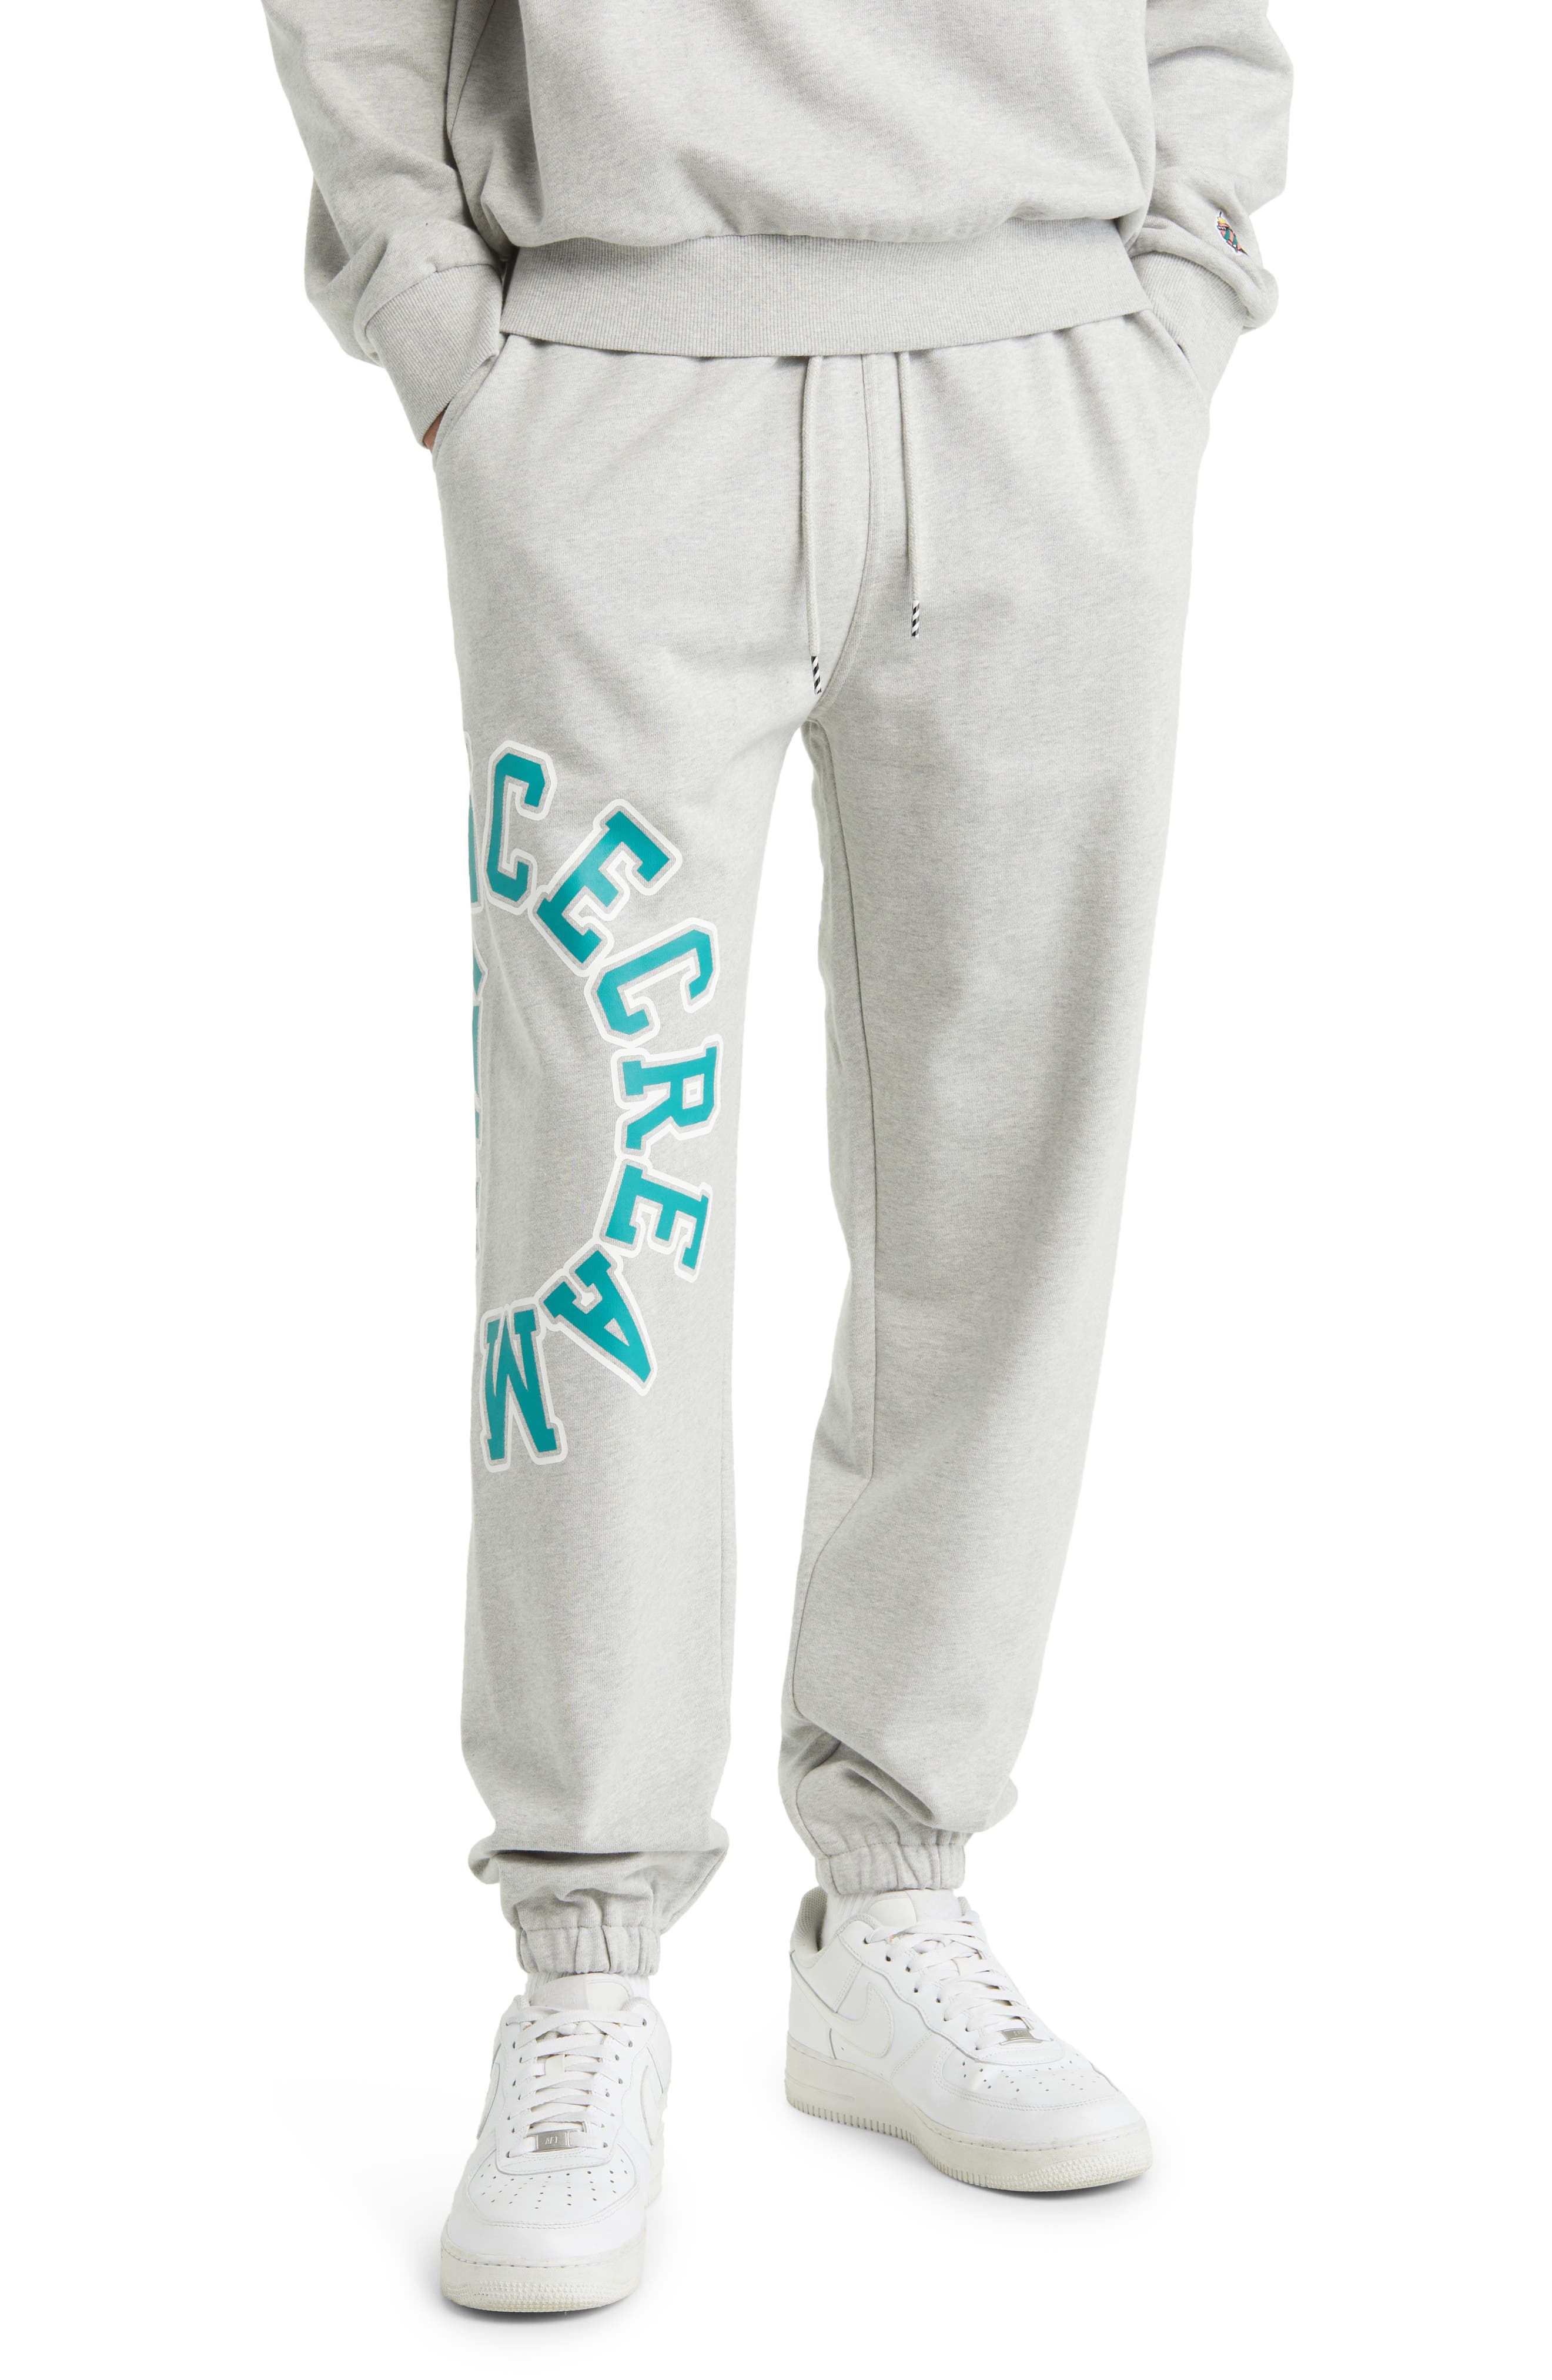 Articulated Cotton Blend Sweatpants